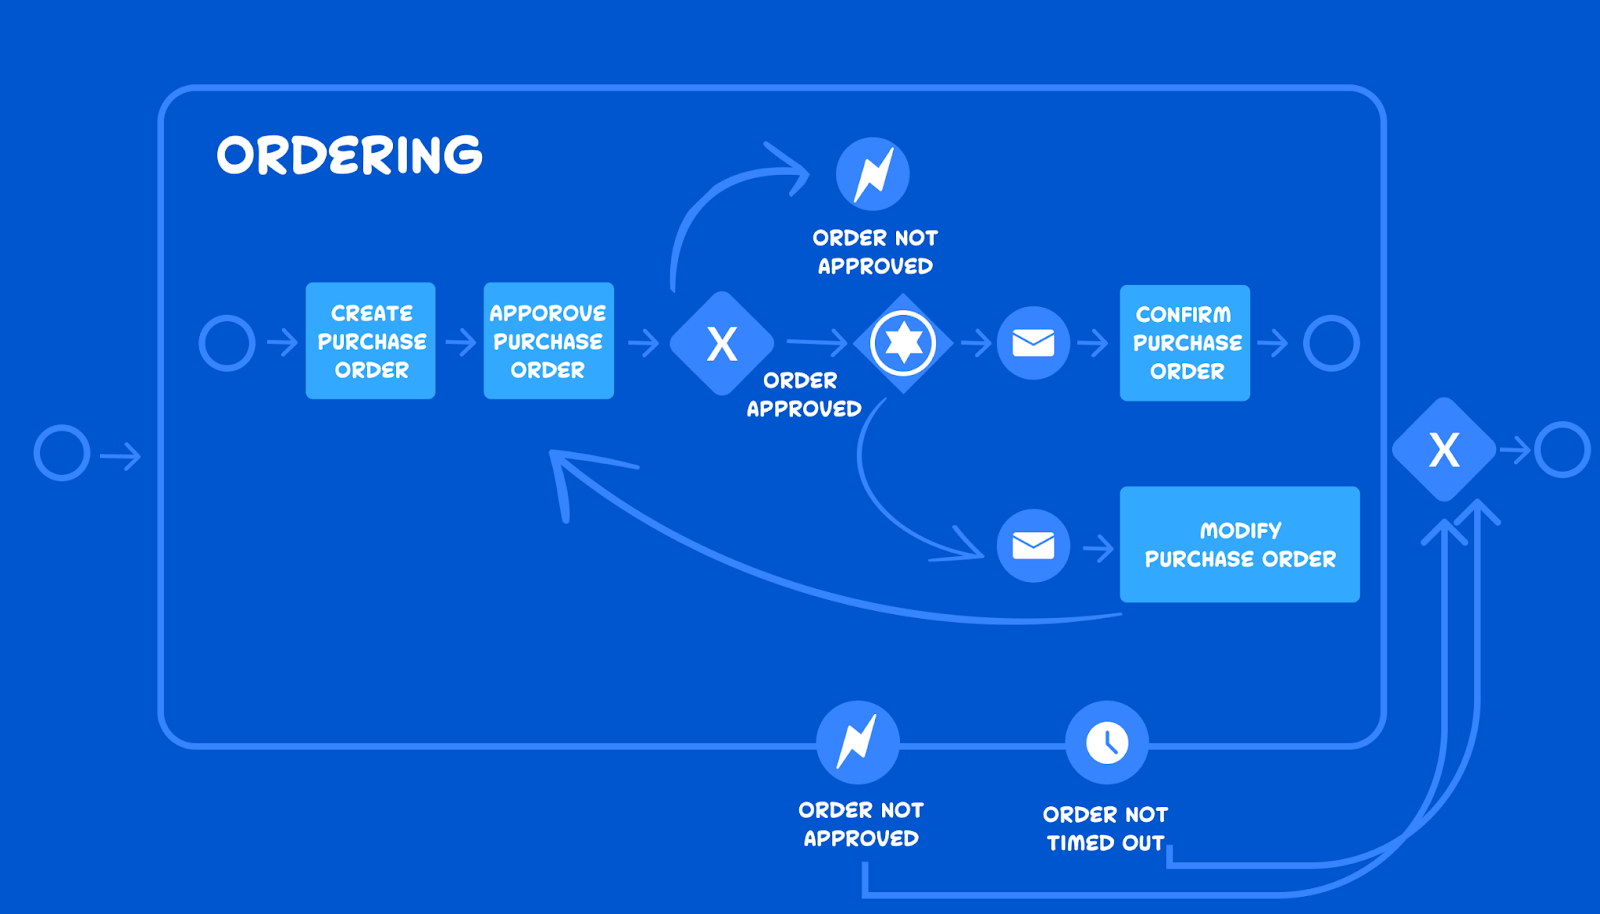 business process model of an ordering process